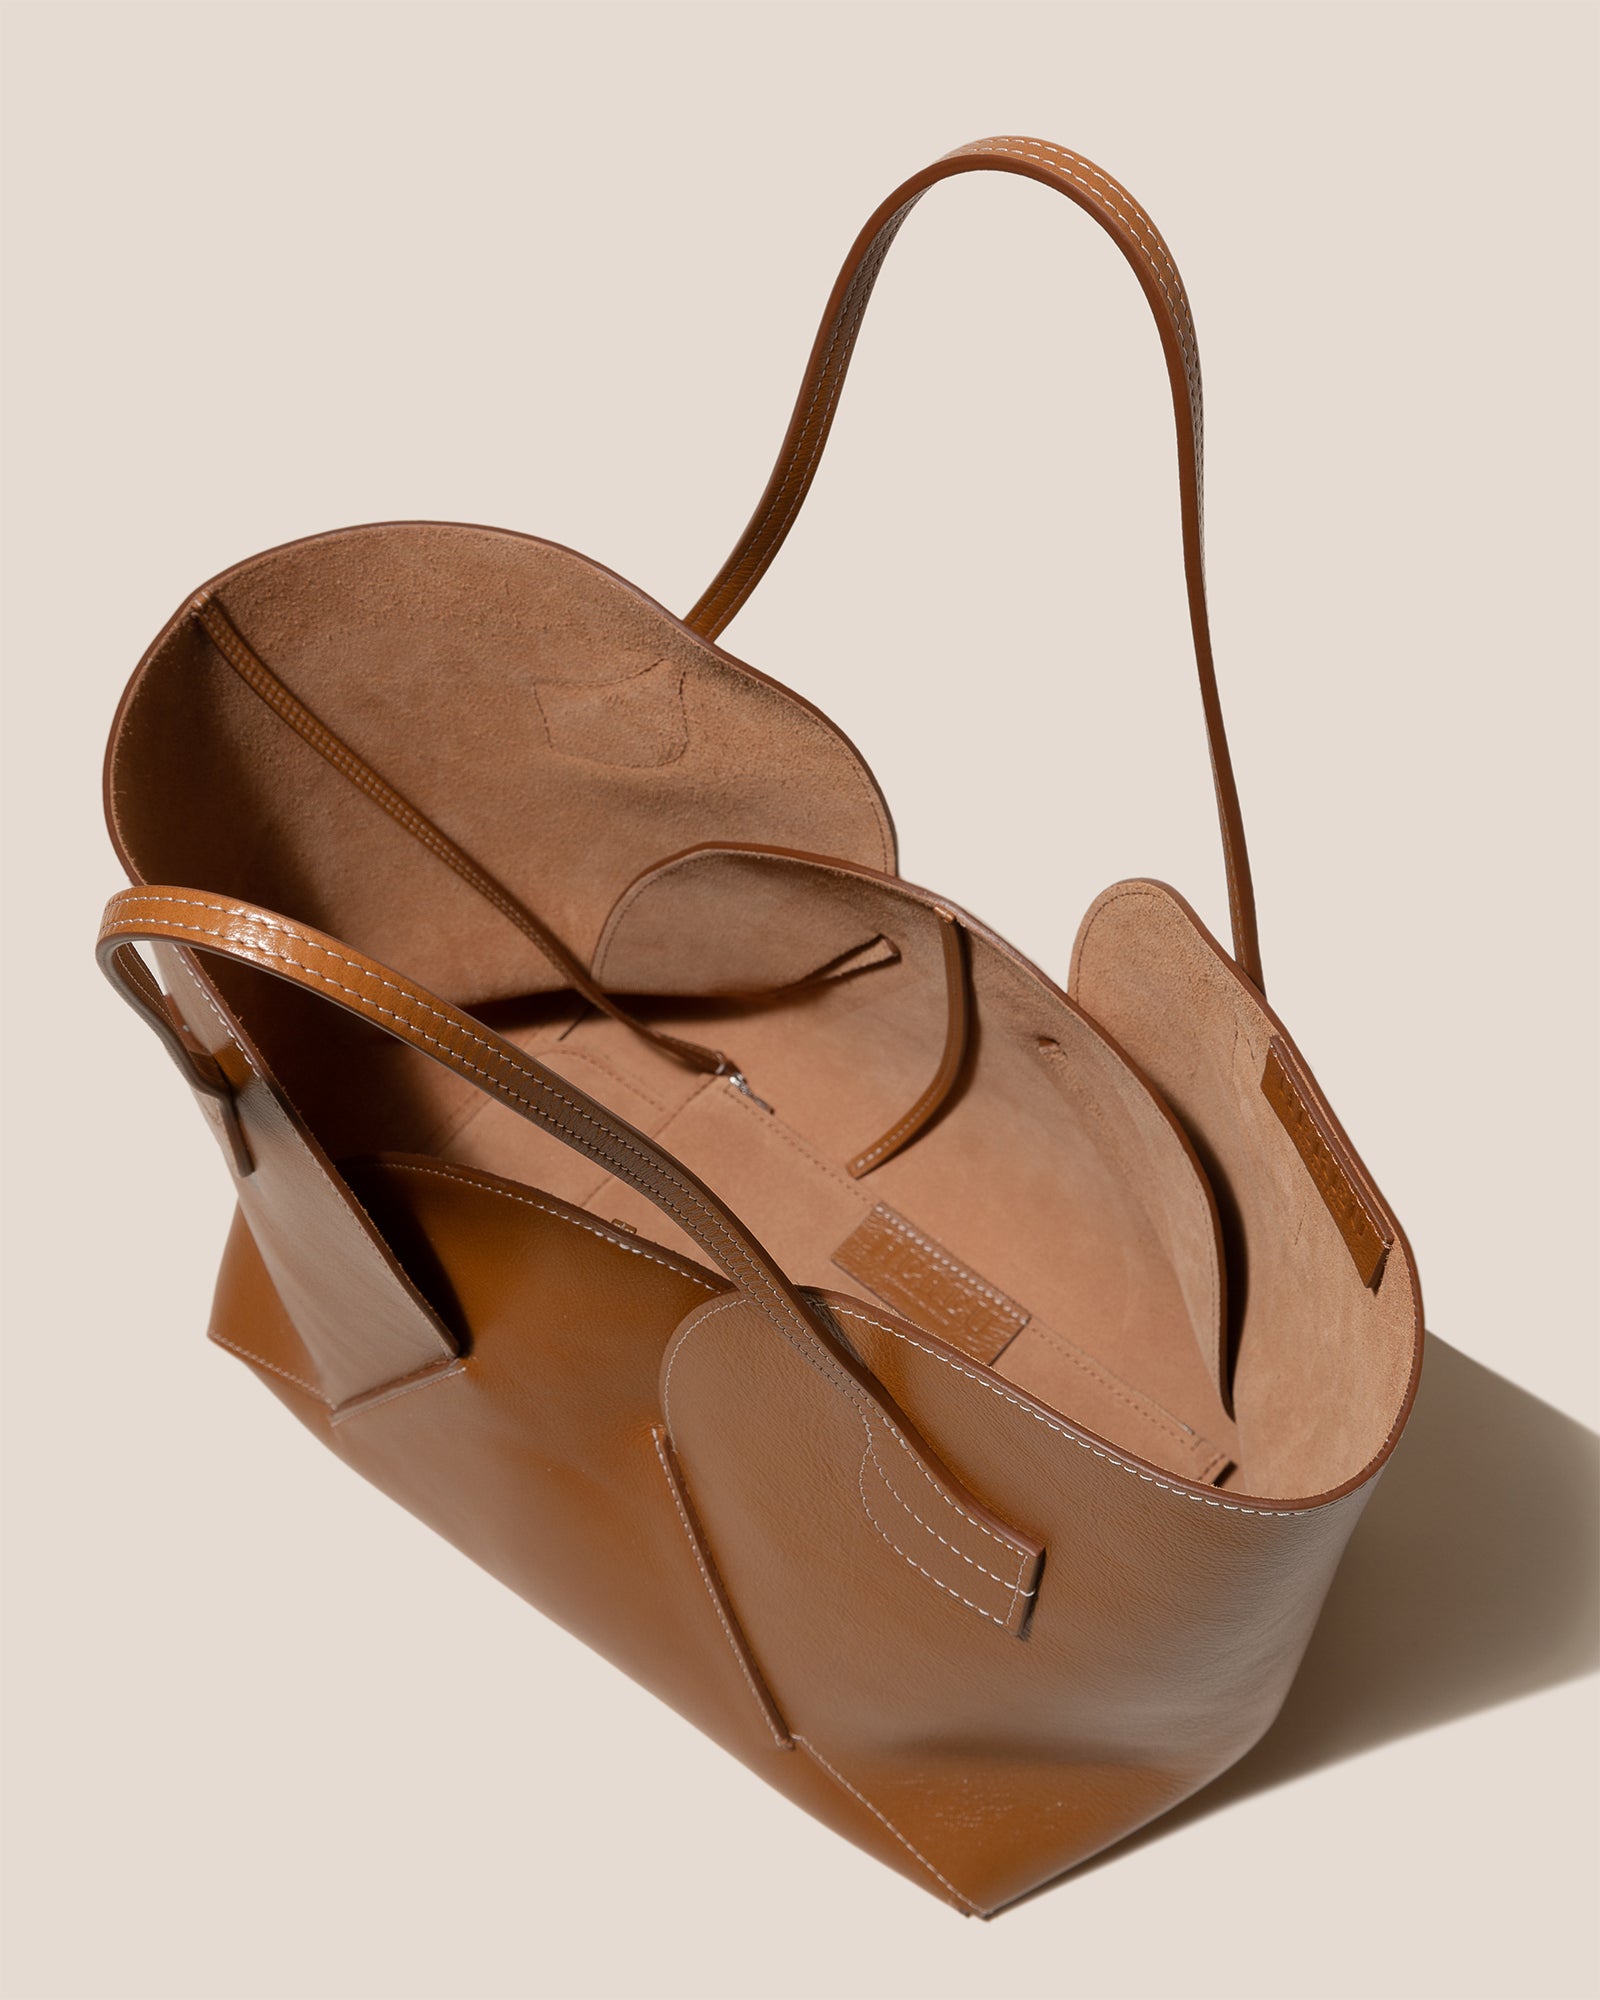 HEREU The Sustainable Edit Coloma Interwoven Tote - Tan